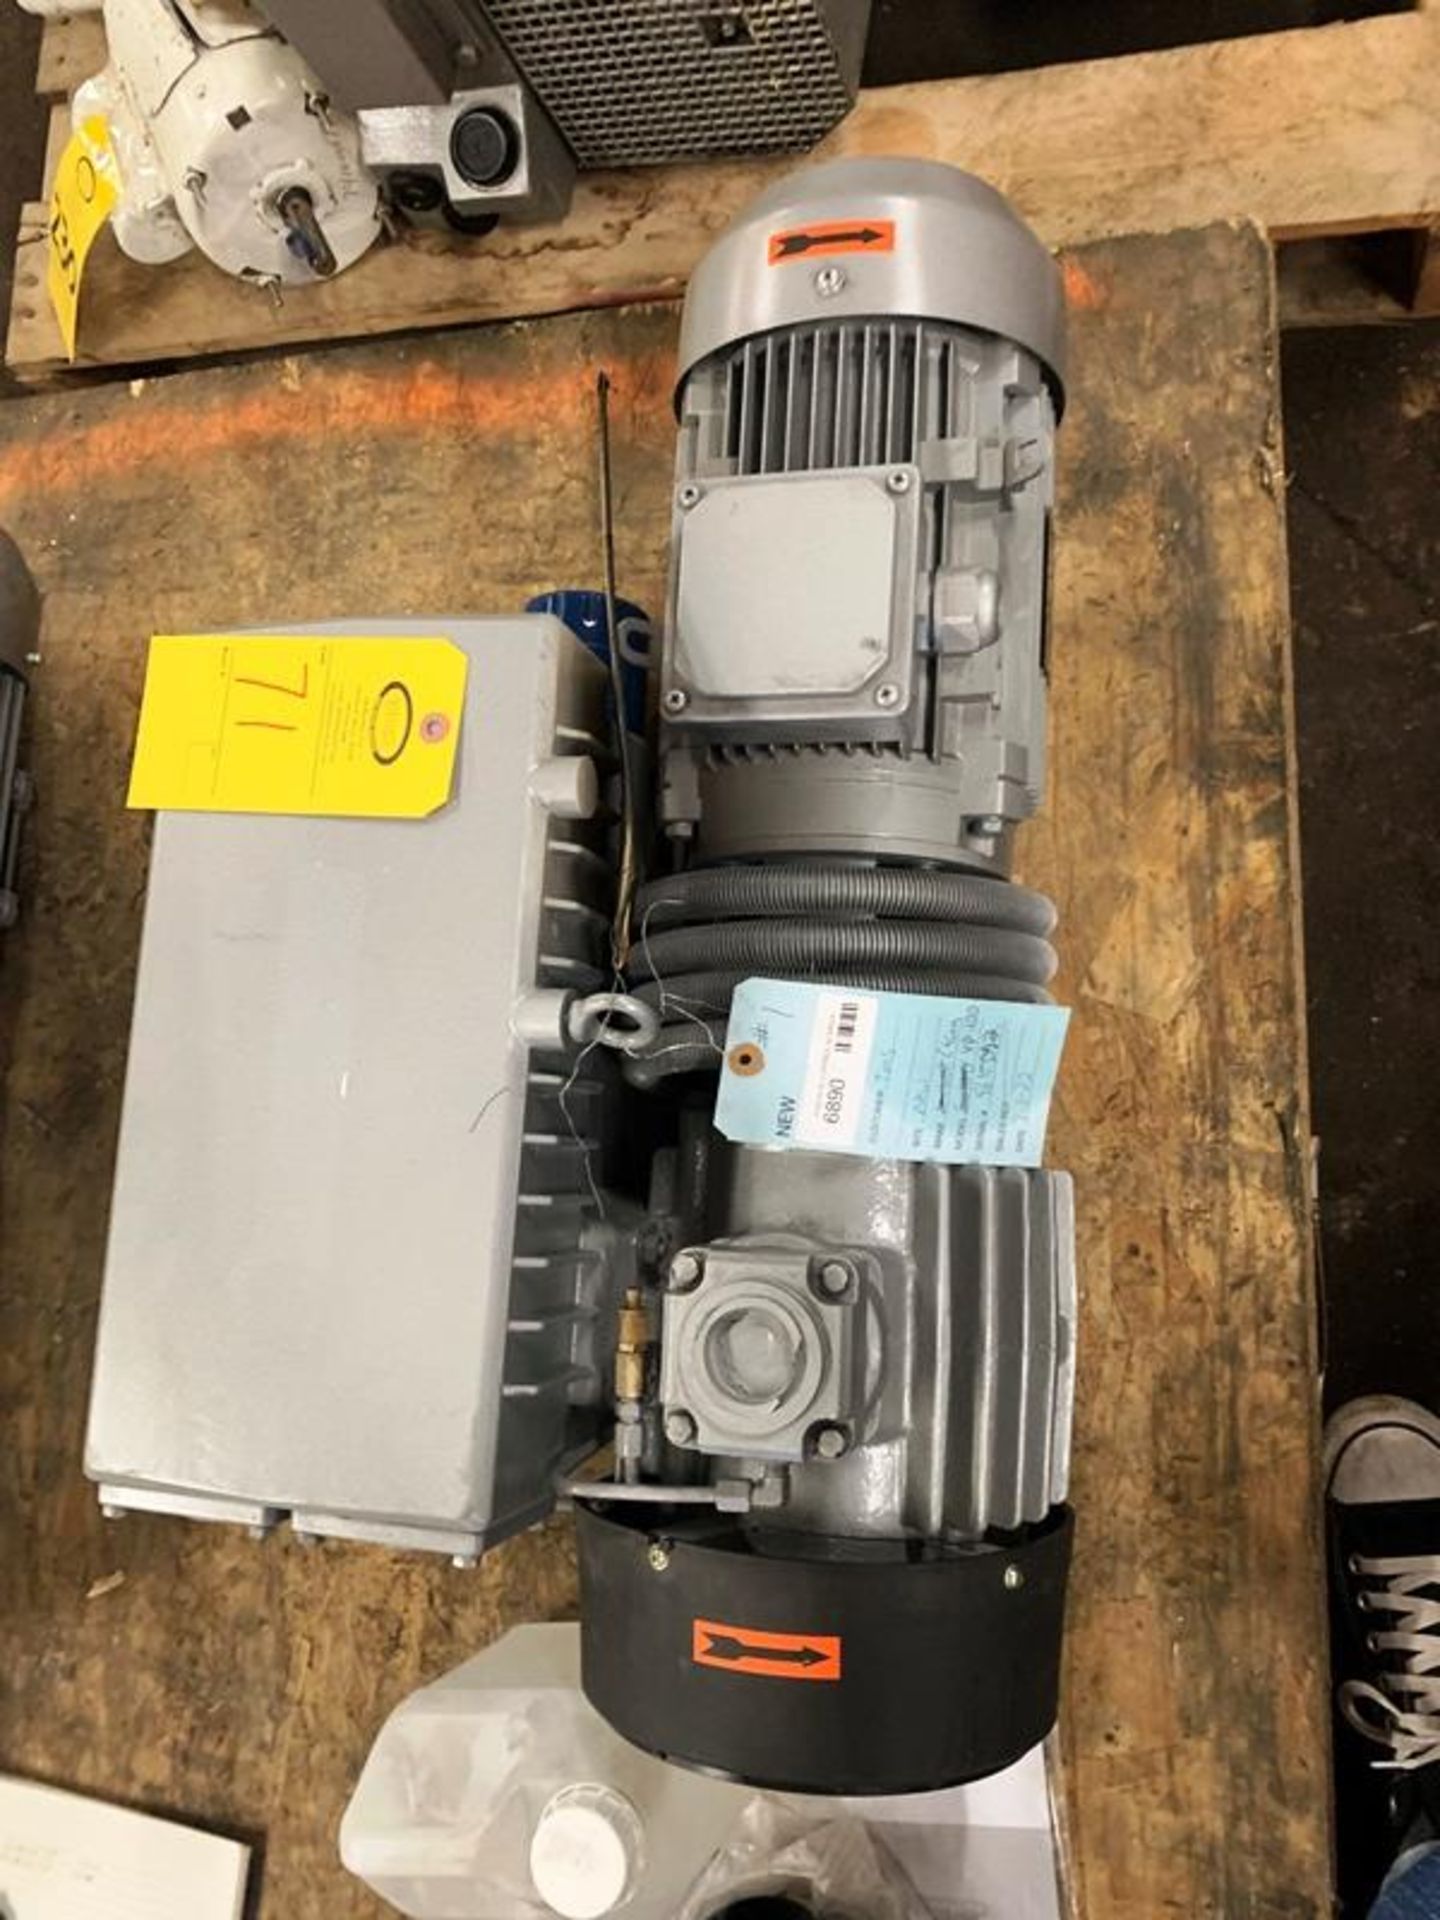 New SV Series Rotary Vane Vacuum Pump, Ser. #5610092, 3 phase, 230/460 volts, new air filter (1) - Image 4 of 6